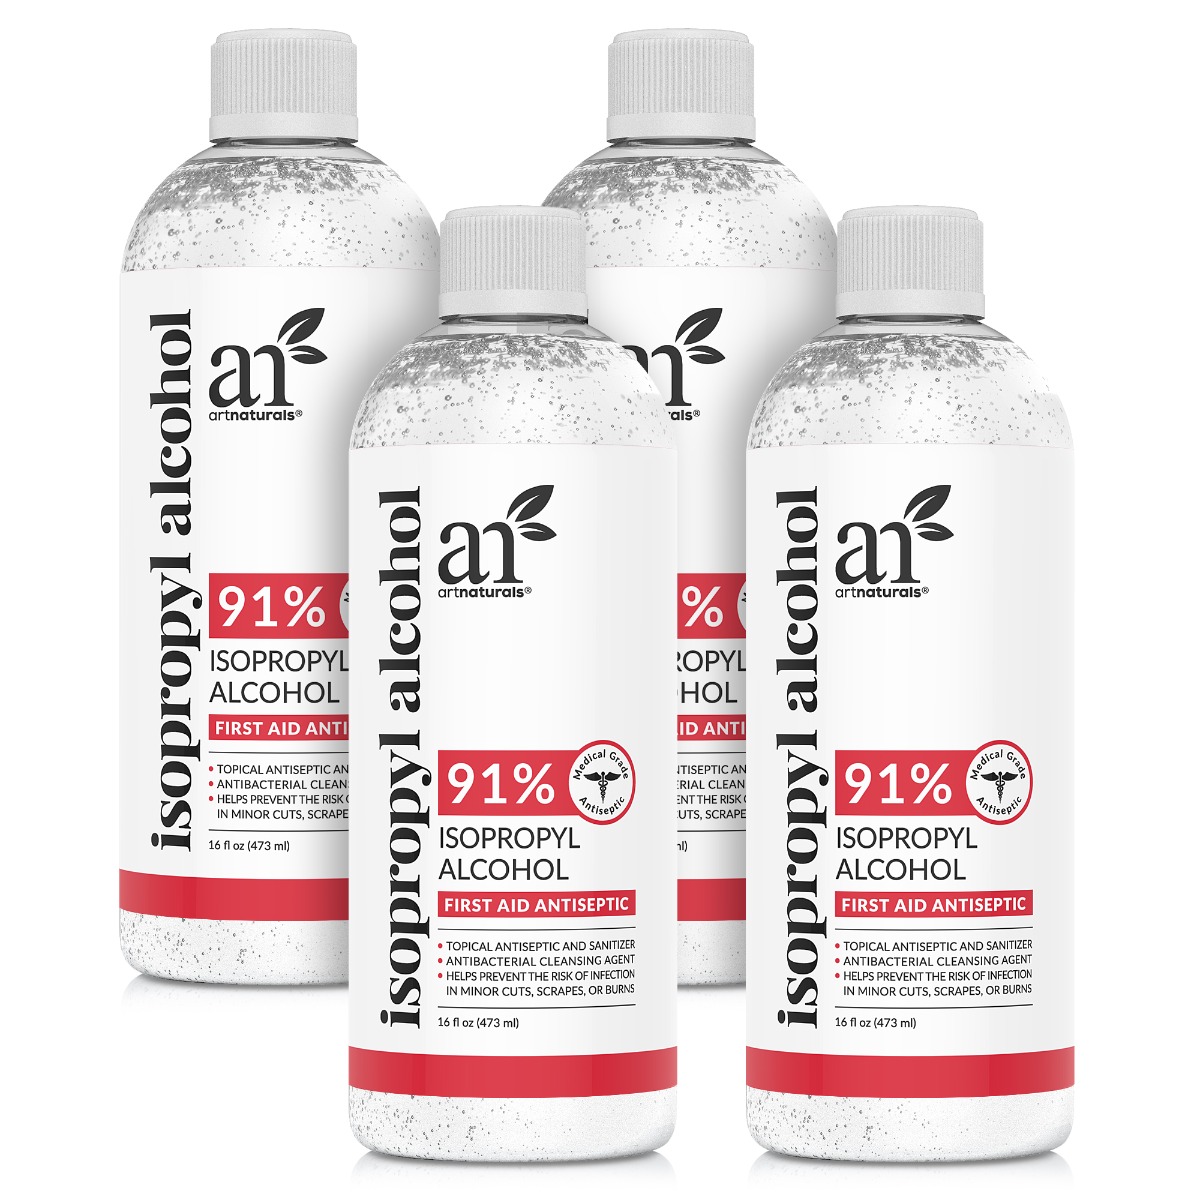 Isopropyl Alcohol 91% Purity - 4 bottles of 16oz discount deal.